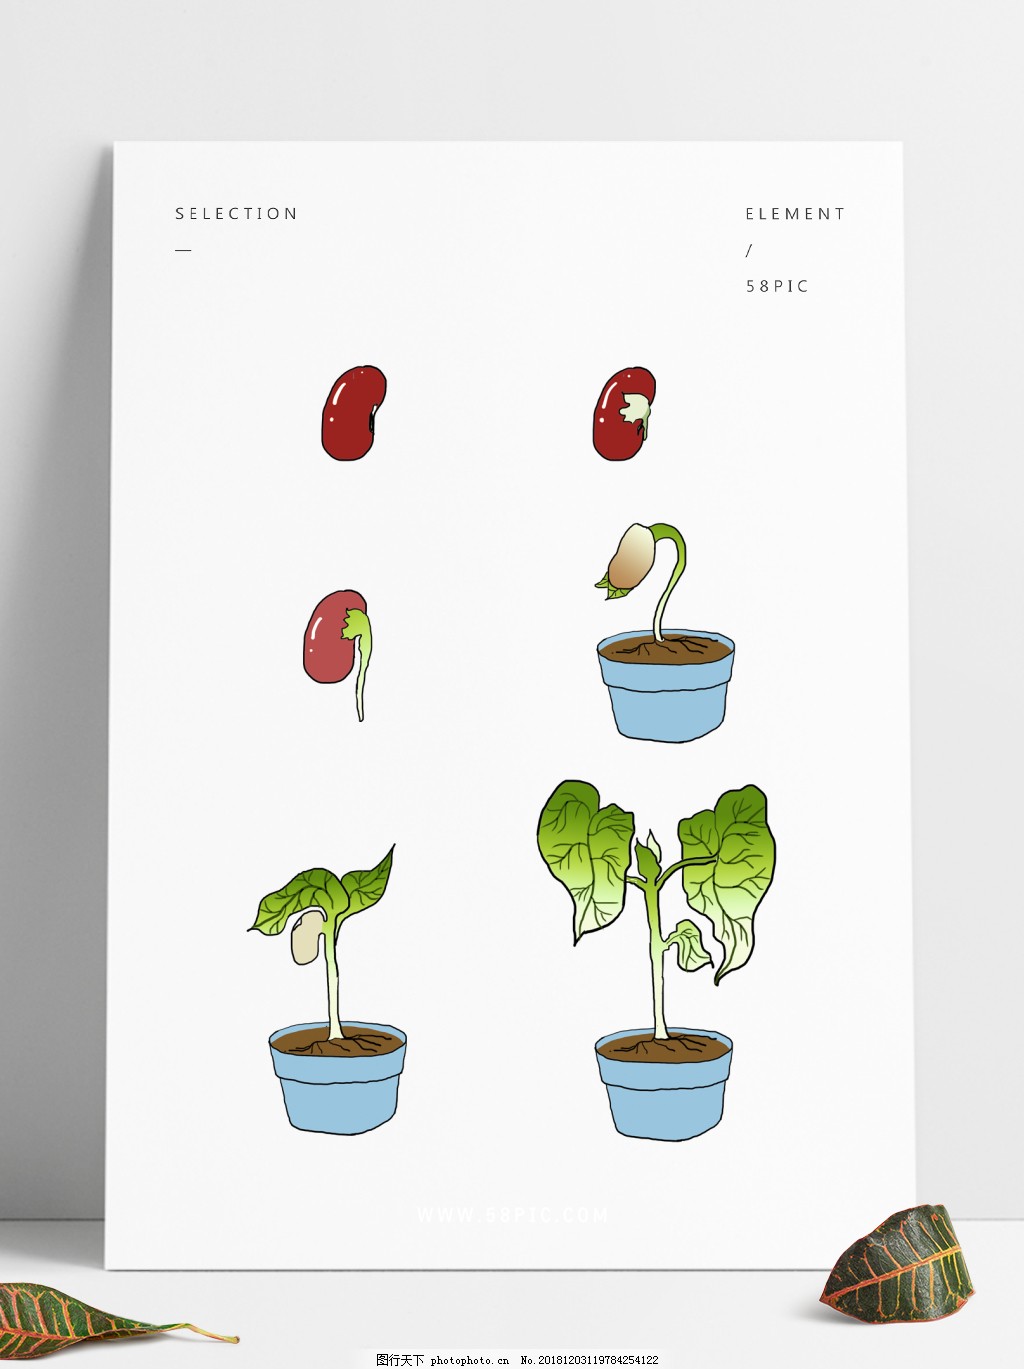 Lifecycle of a bean plant | labquiz